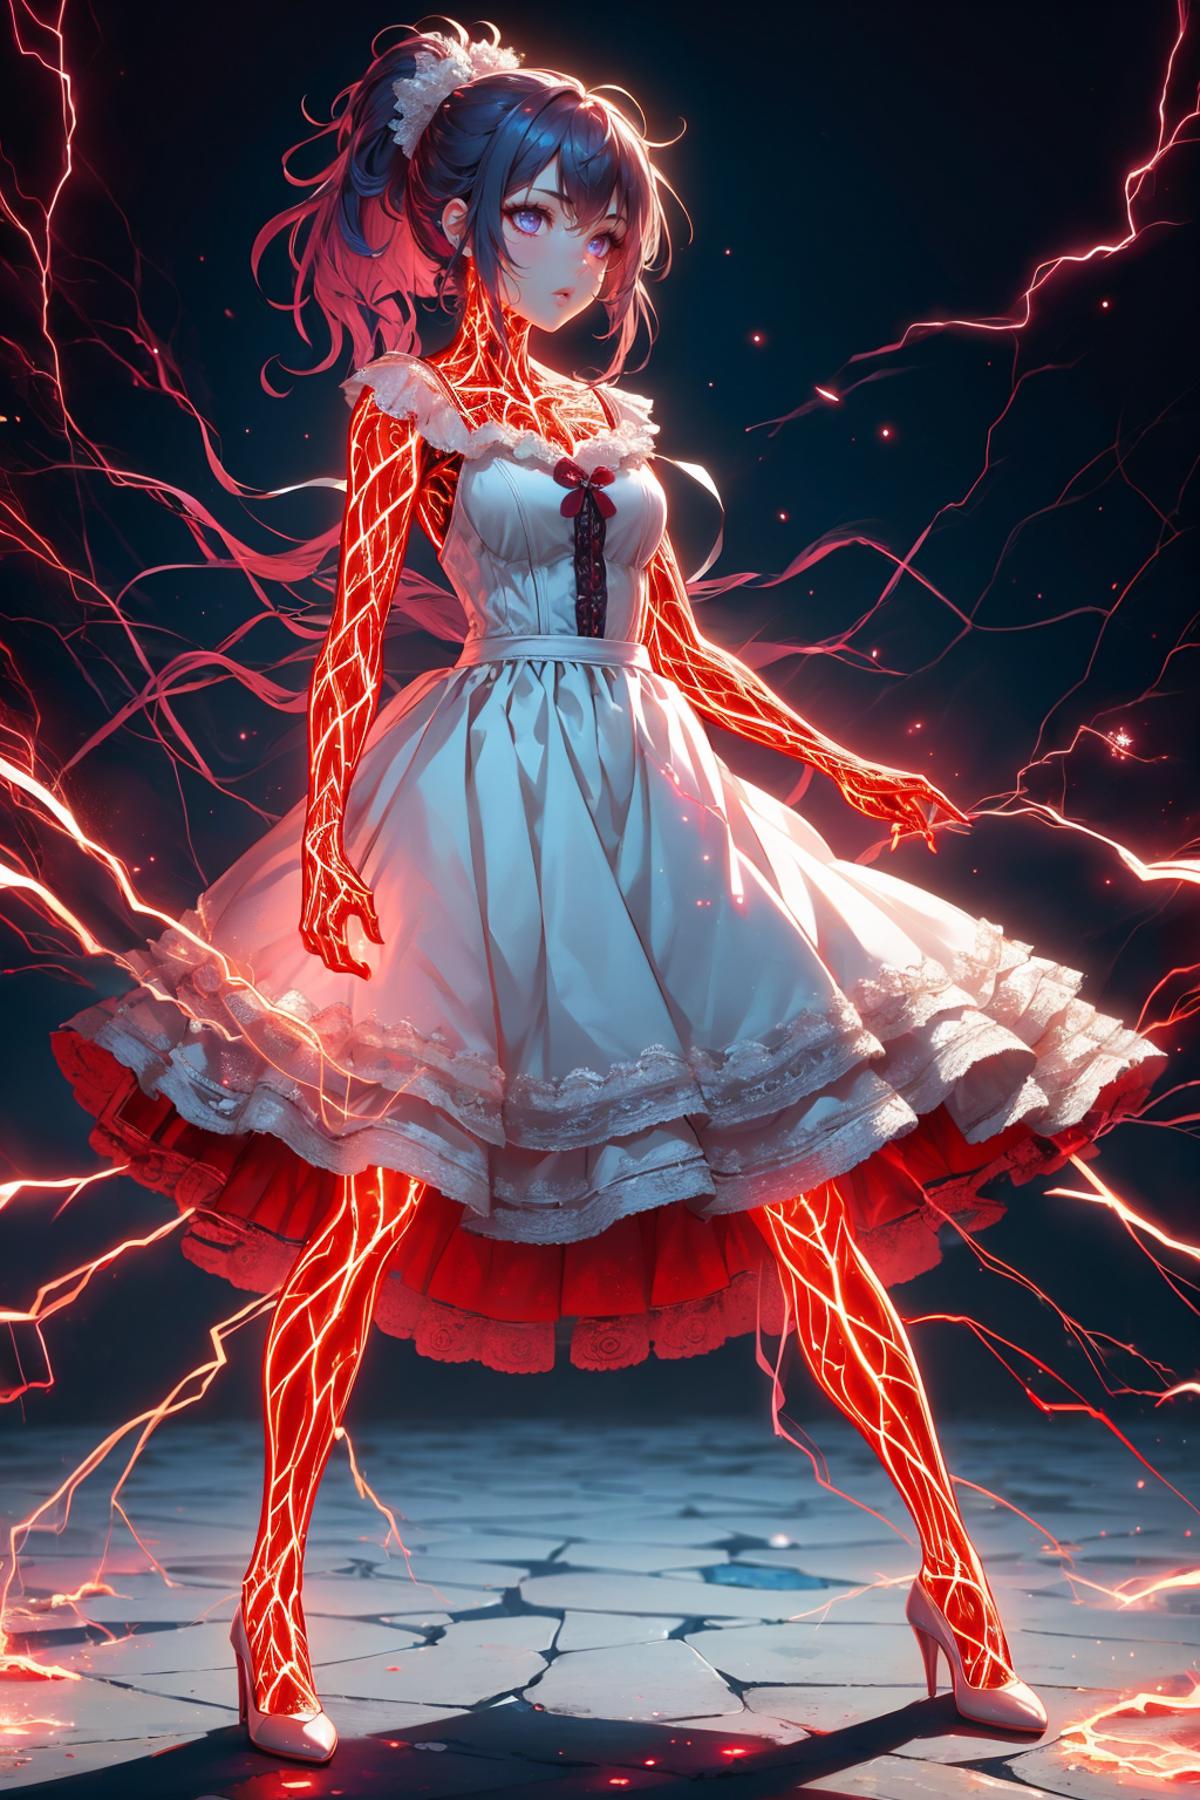 Anime girl with red streaks in her hair and a white dress.